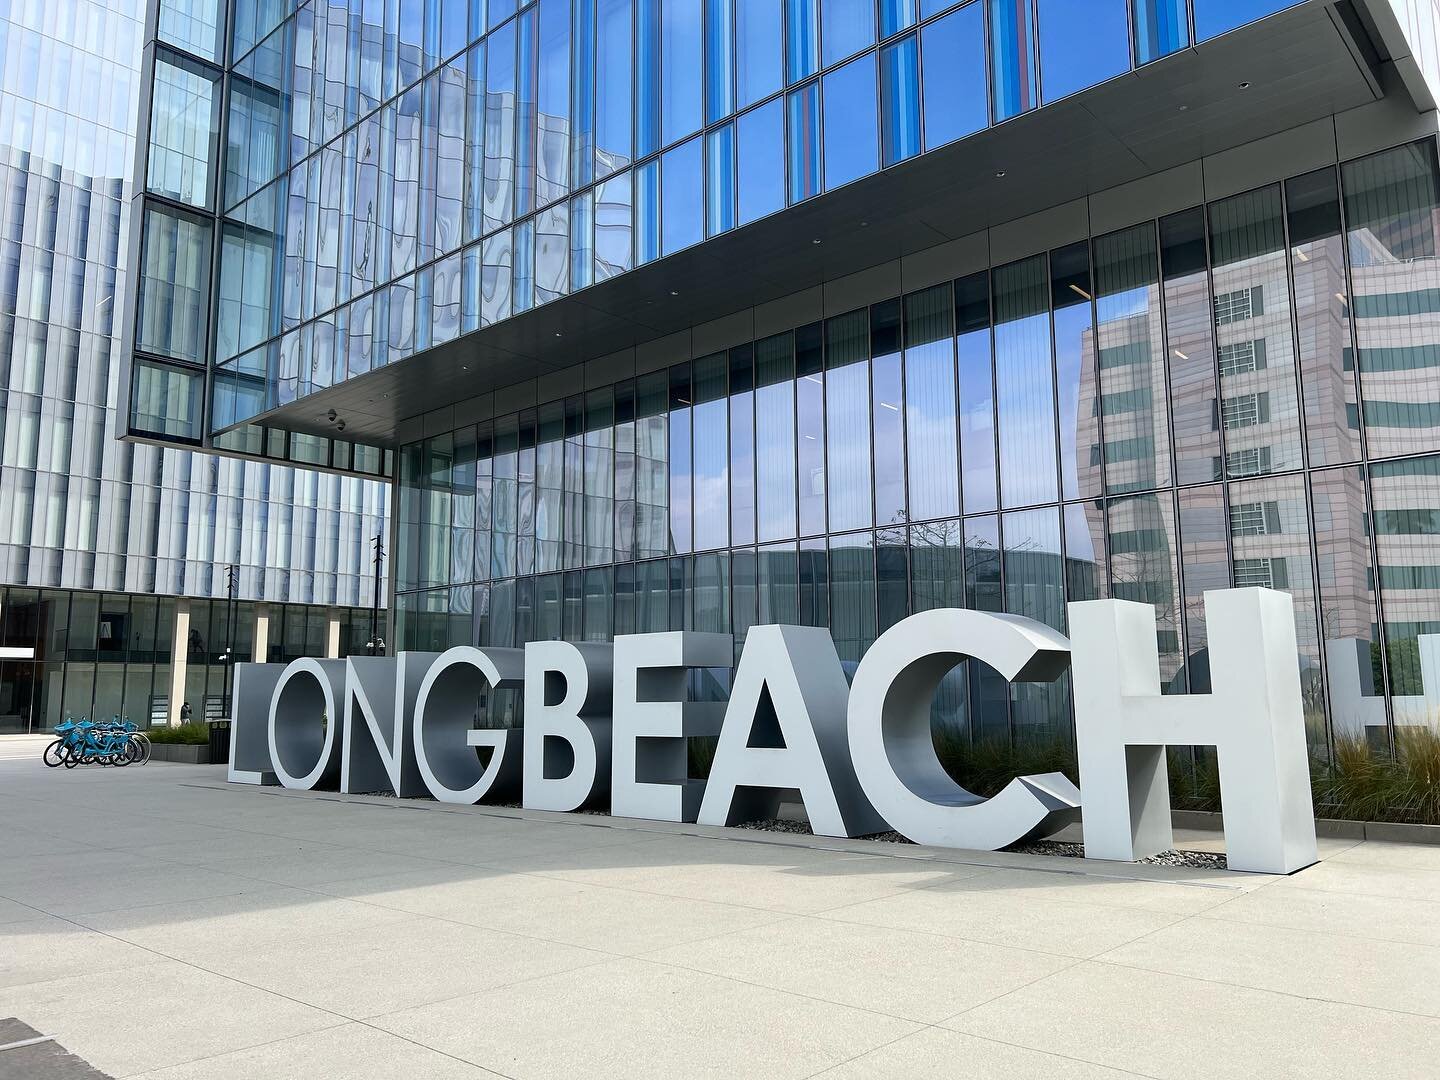 Excited to start our partnership with the Port of Long Beach.

Kicked things off with a group tour of the port!

#videoproductioncompany #videoproduction #videoshoot #marketingvideo #marketing #videoproductionla #corporatevideographer #corporatevideo